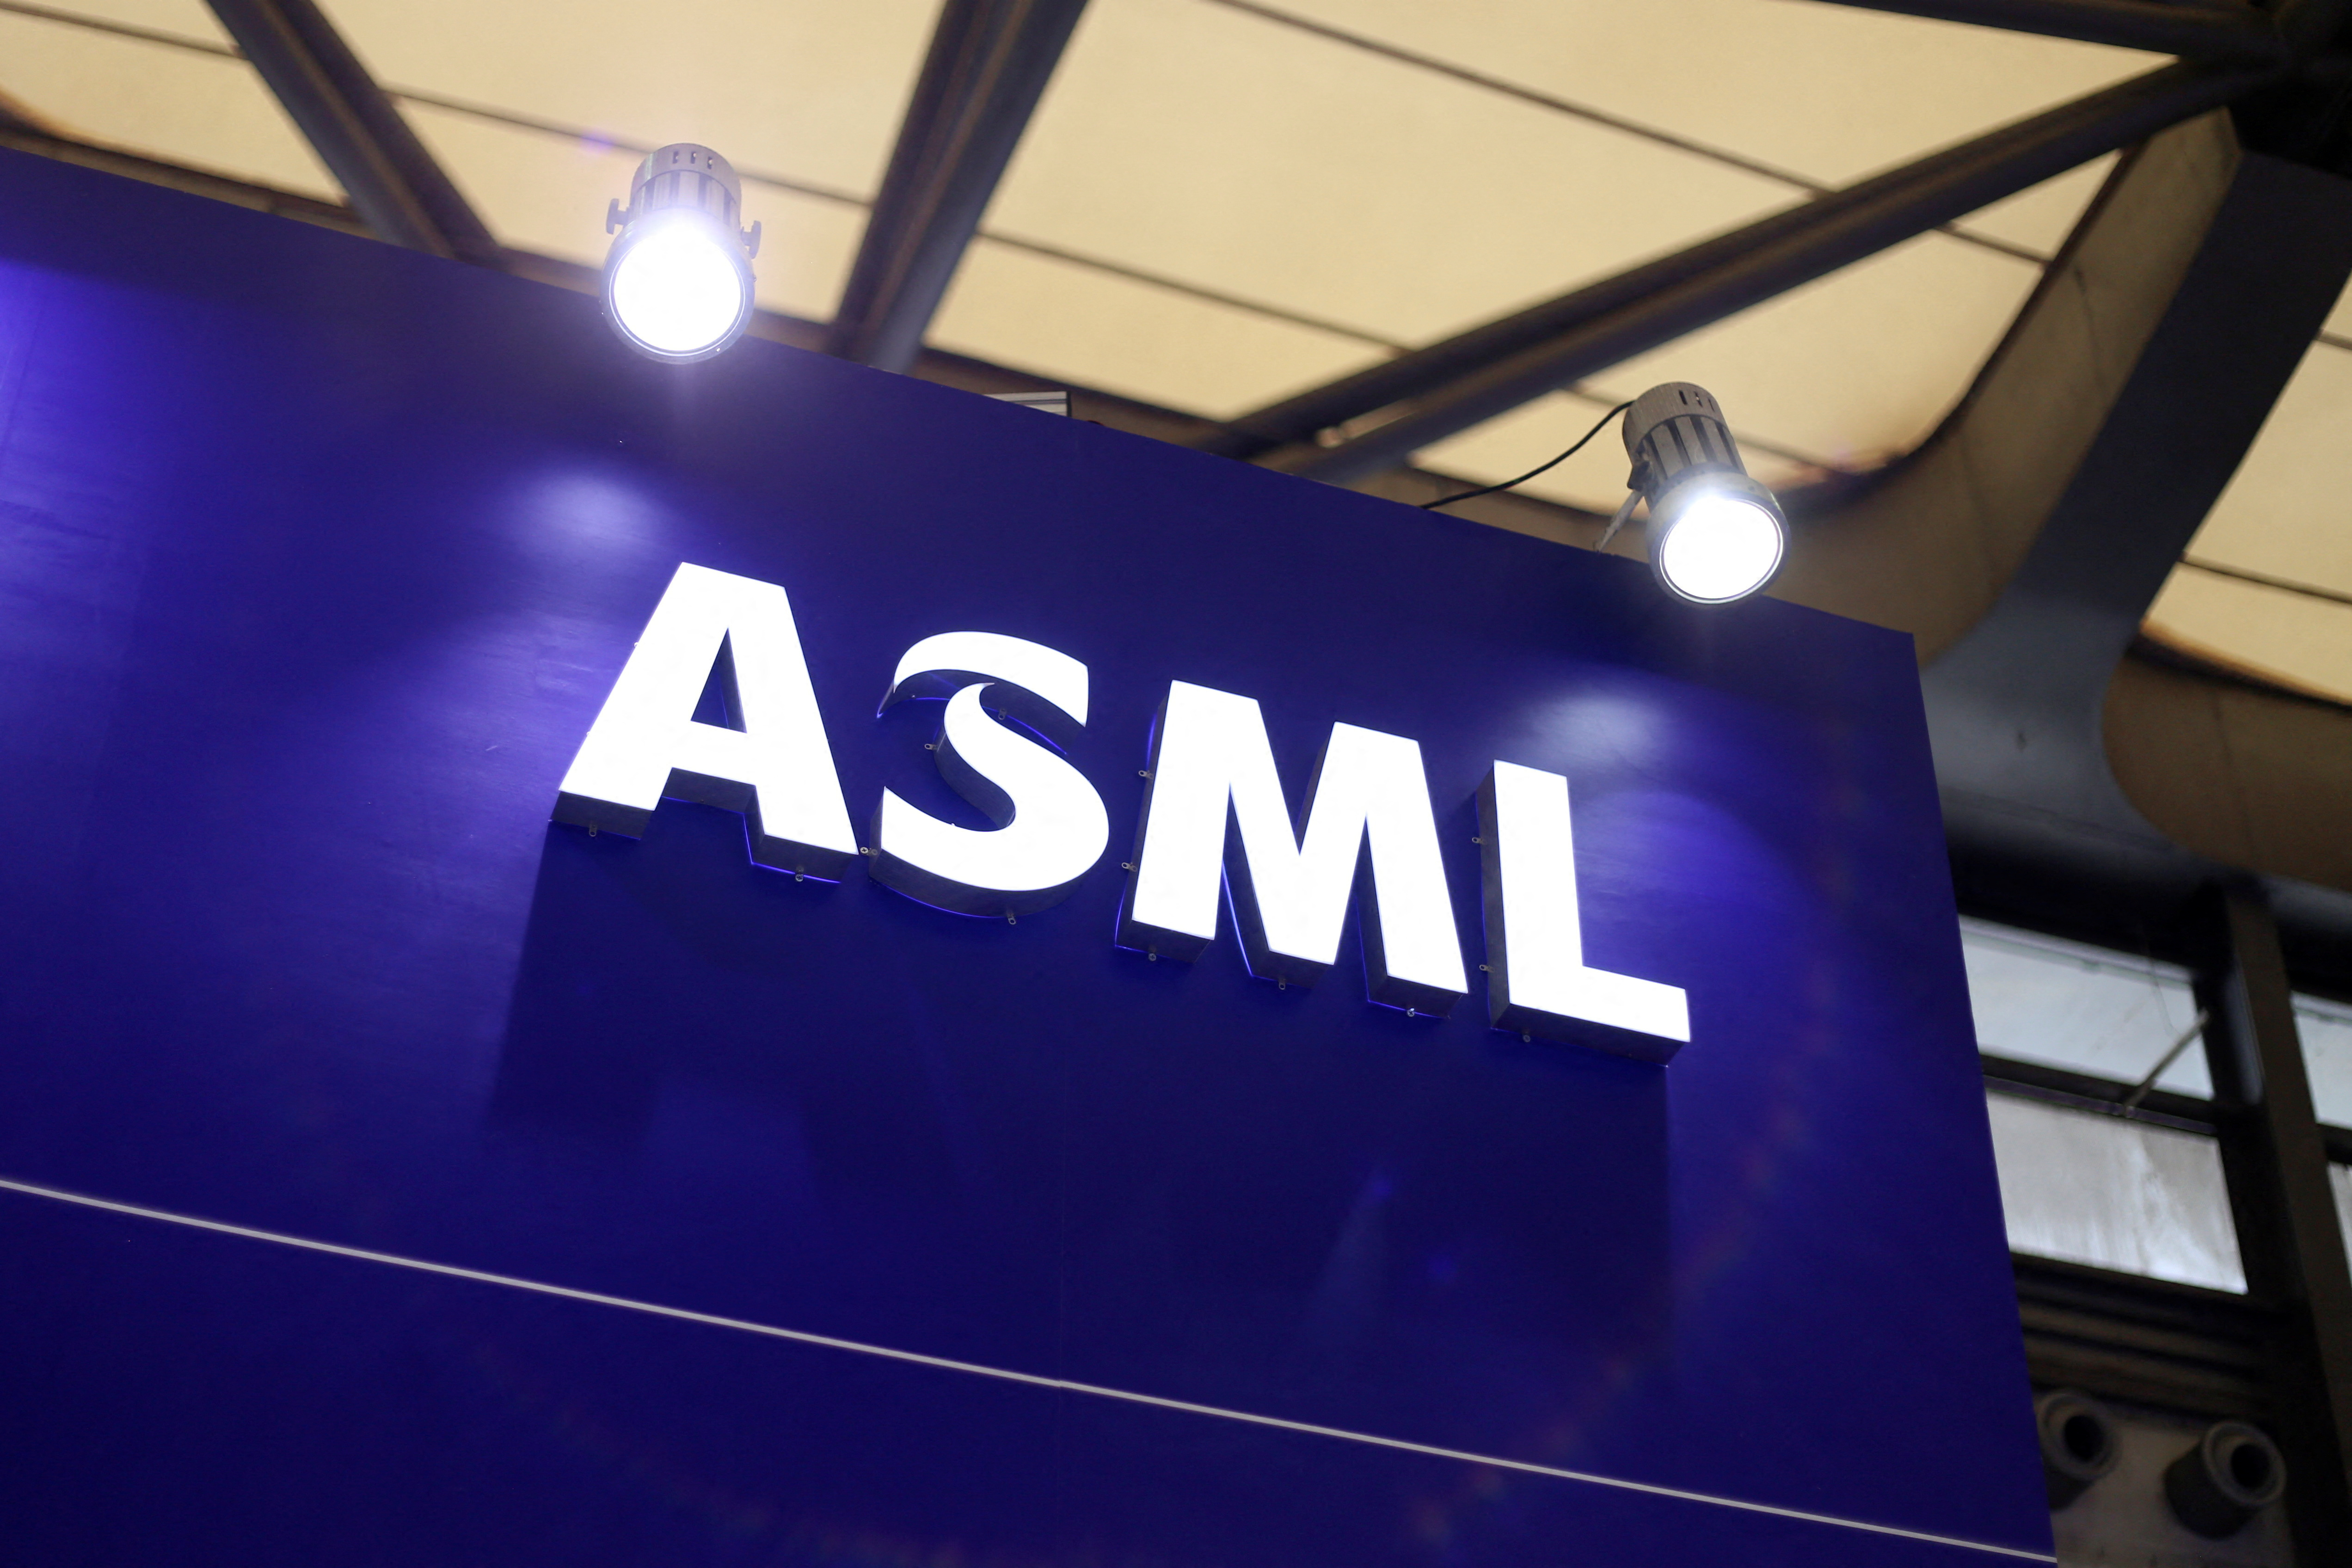 ASML on X: Whether you've known ASML for a long time or just